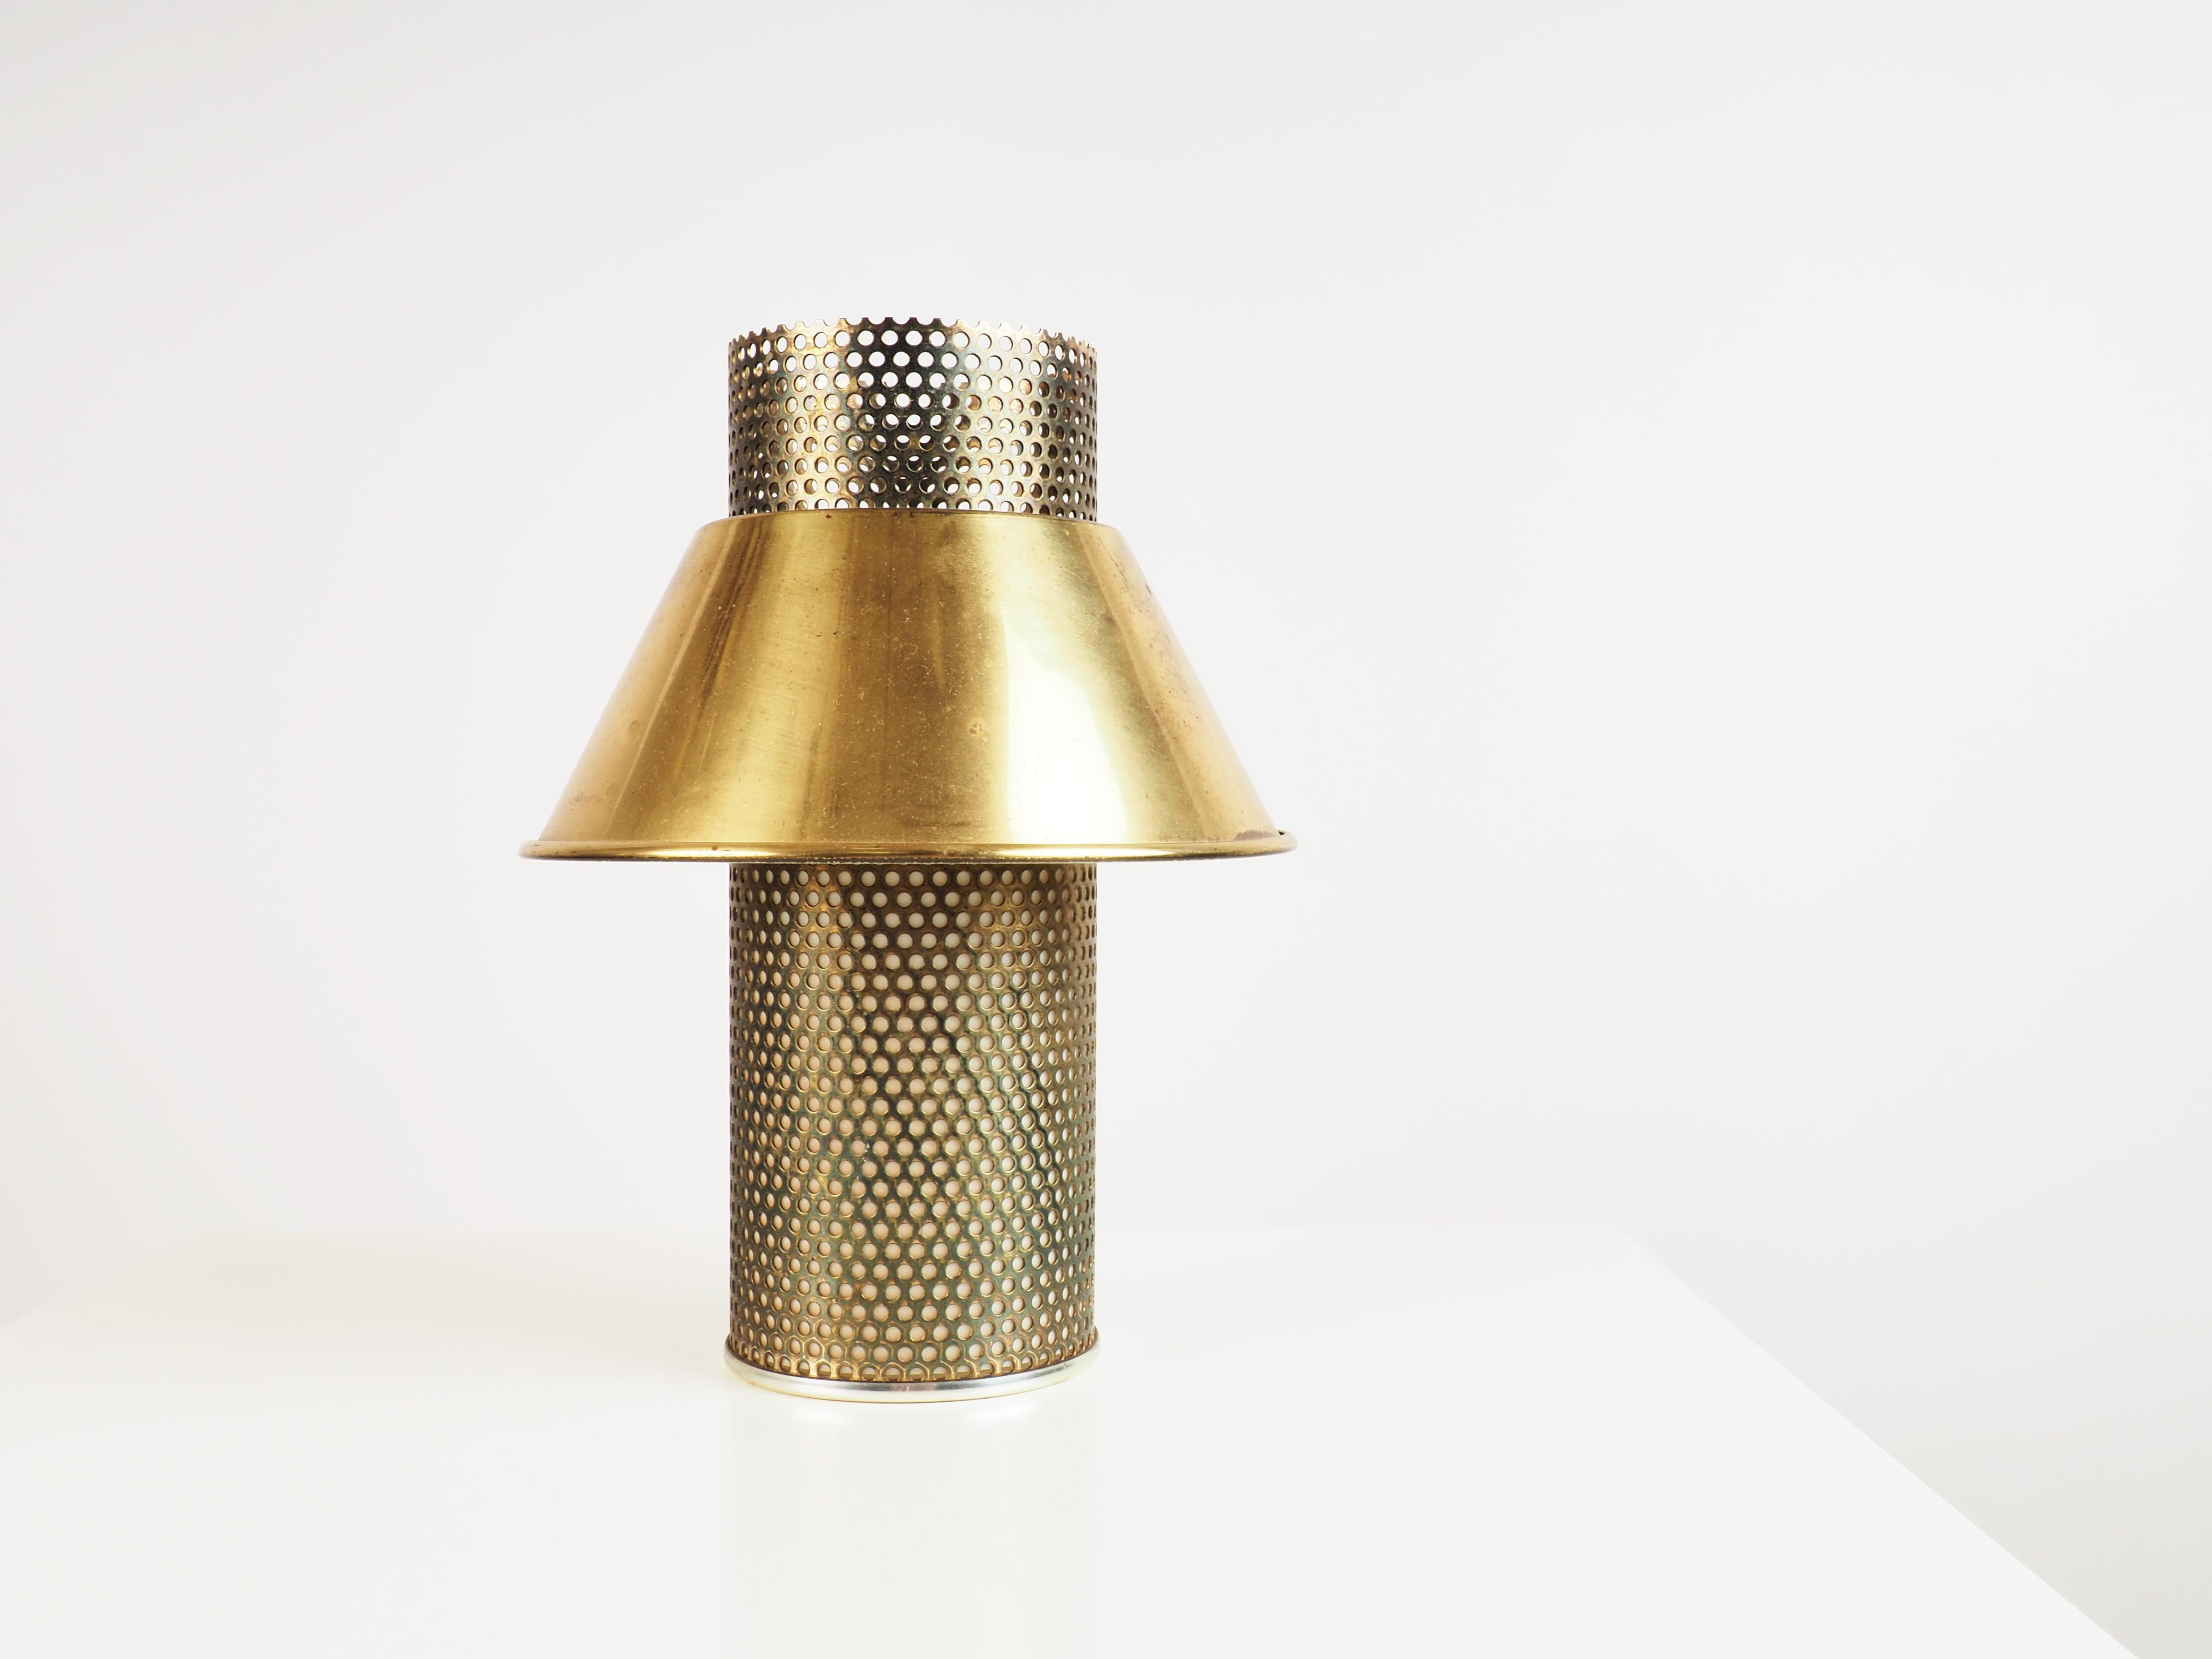 Rare table lamp in perforated brass by the Swedish lamp designer Hans Agne Jakobsson. Produced in his own factory in the village of Markaryd, Sweden.